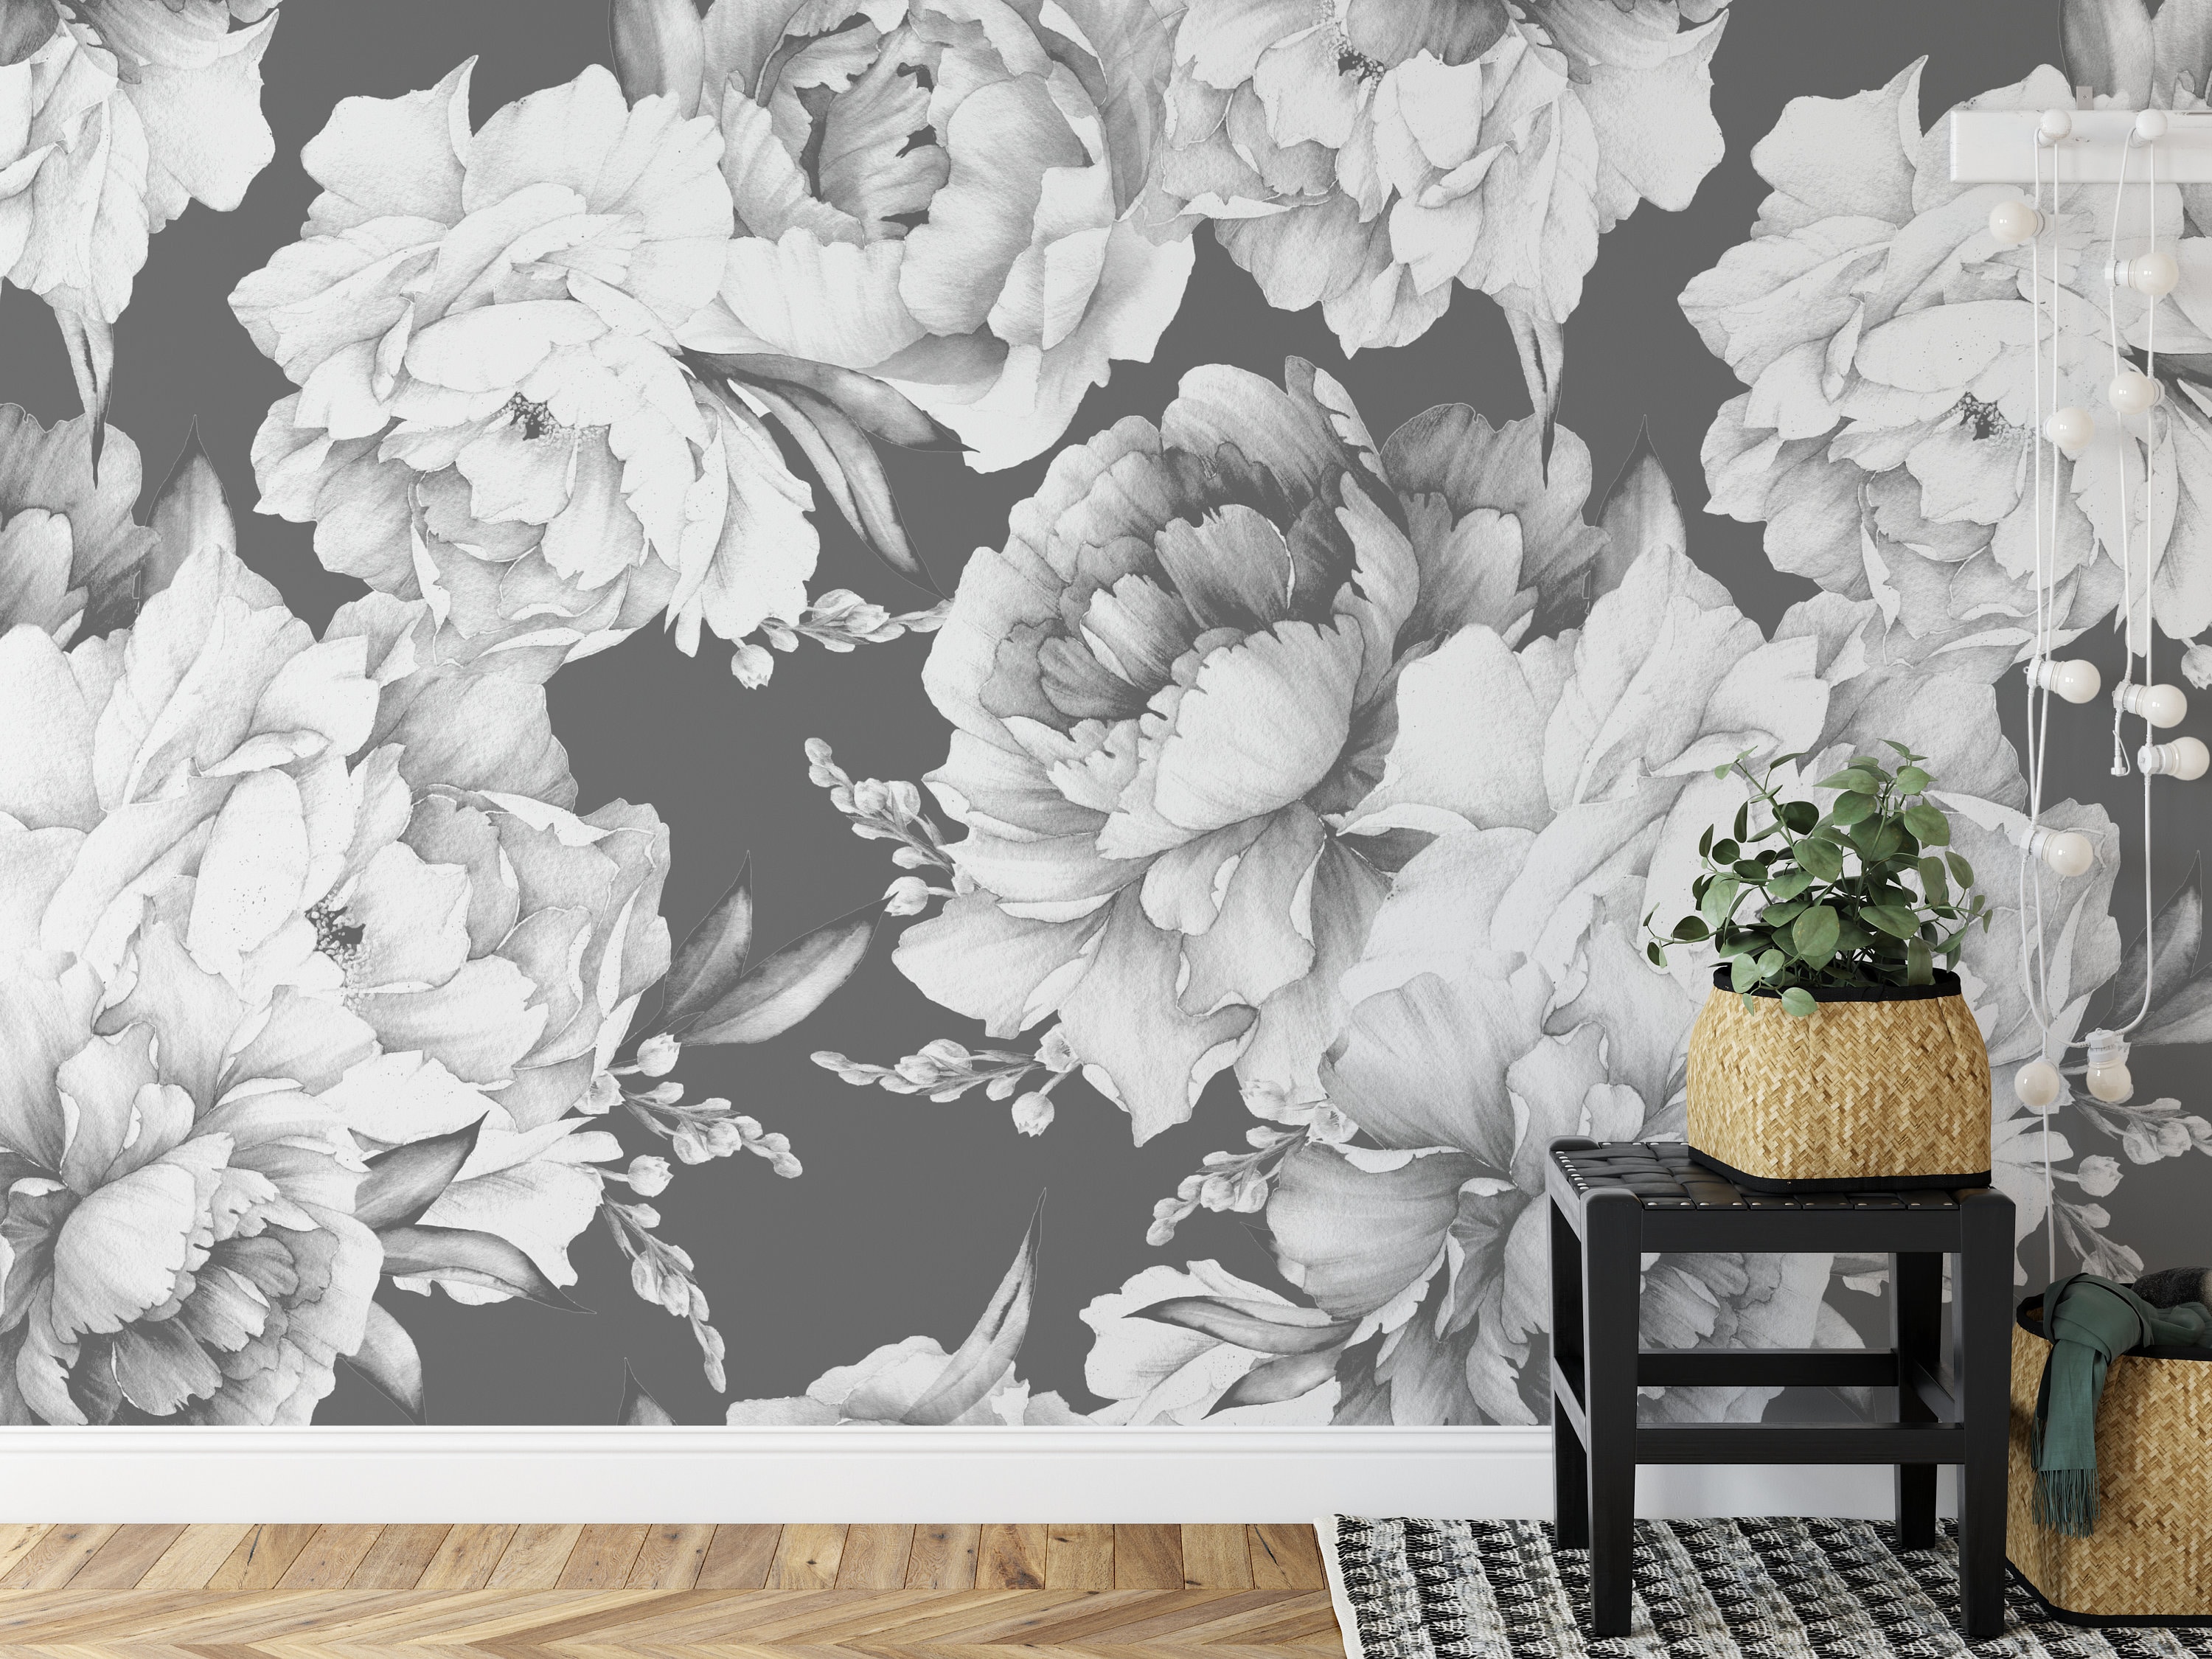 Buy Peony Wallpaper in Black and White Watercolor Flowers Online in India   Etsy